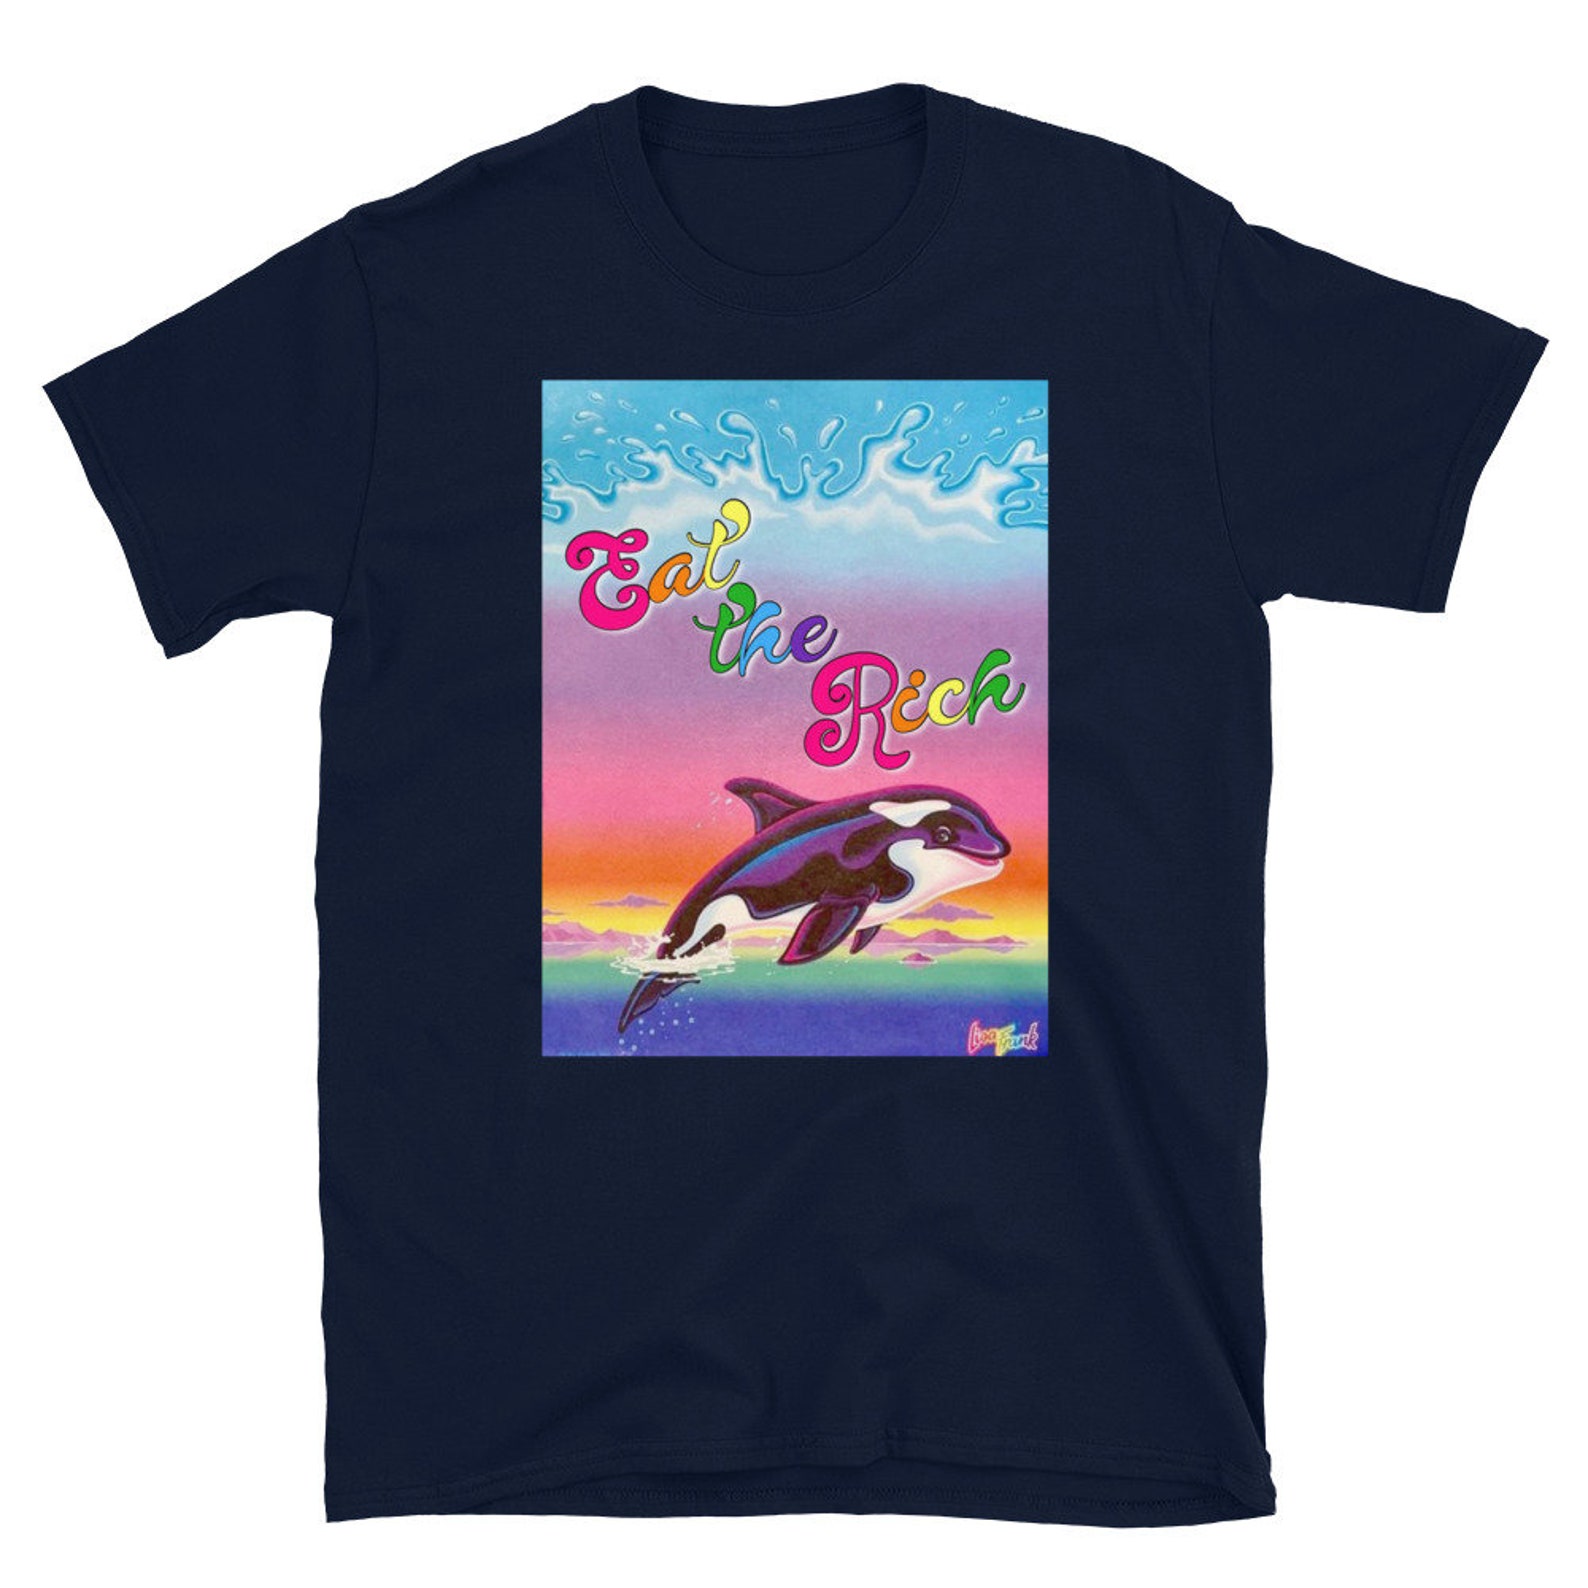 Lisa Frank-inspired Funny Shirt With Orca Whale Eat the Rich Colorful ...